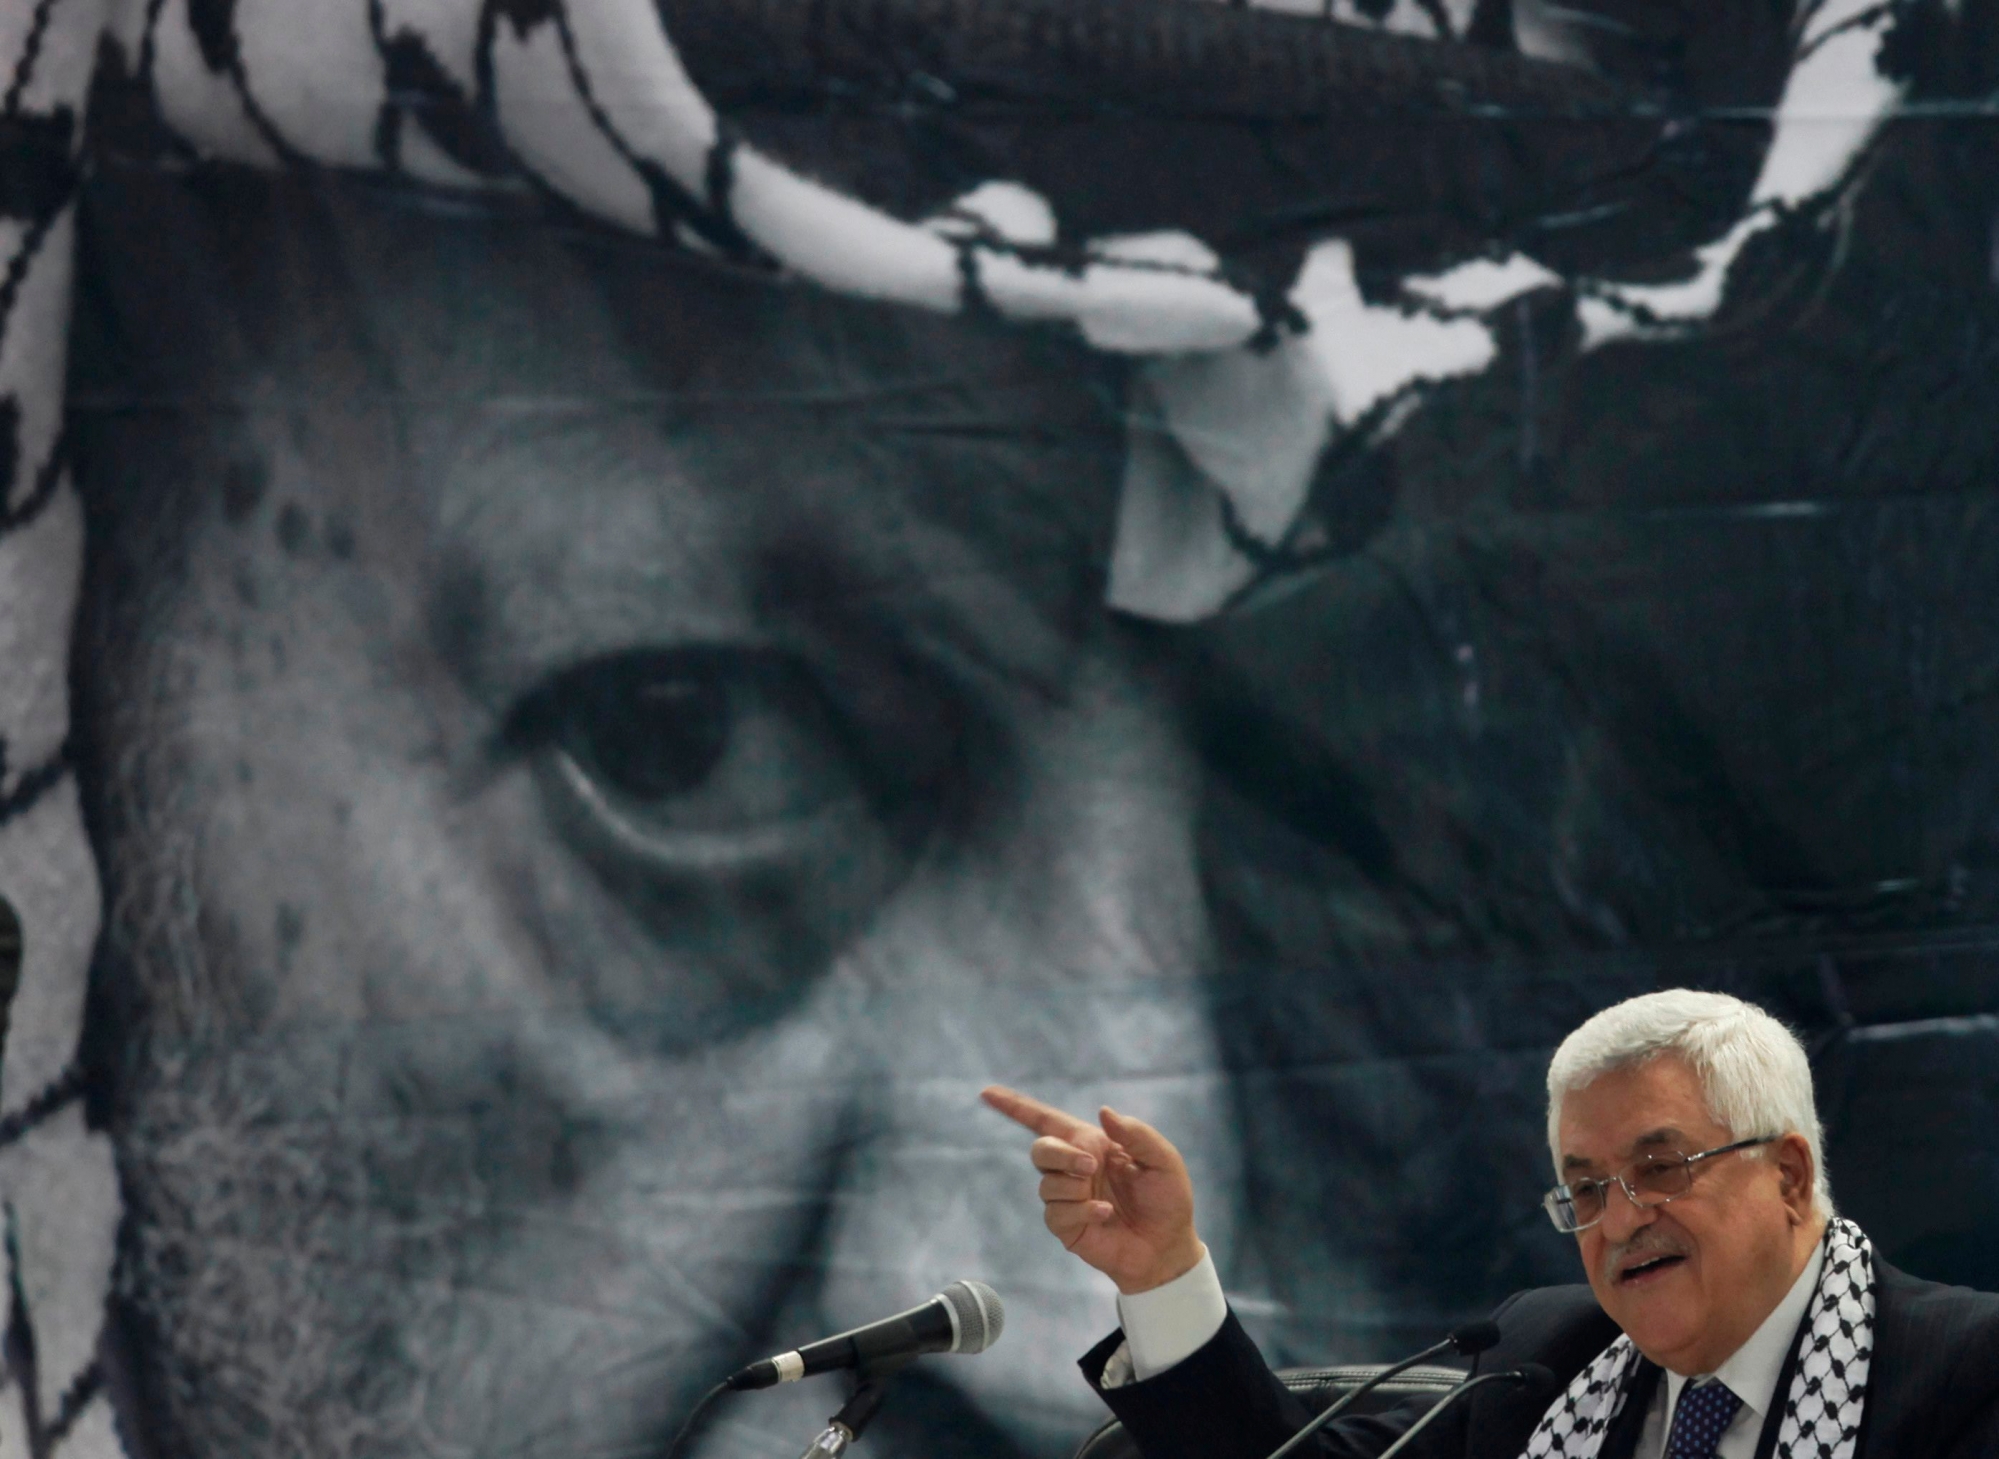 FILE - In this Aug. 4, 2009 file photo, Palestinian President Mahmoud Abbas speaks at the Fatah conference with a portrait of late Palestinian leader Yasser Arafat in the background, in the West Bank town of Bethlehem. With paths to Palestinian statehood blocked, President Mahmoud Abbas is warning heís fast-tracking his retirement and hinting he will announce dramatic policy changes at the United Nations General Assembly on Sept. 30, 2015 including a more-confrontational relationship with Israelís right-wing government. (AP Photo/Tara Todras-Whitehill, File) Mideast Palestinians Abbas Future